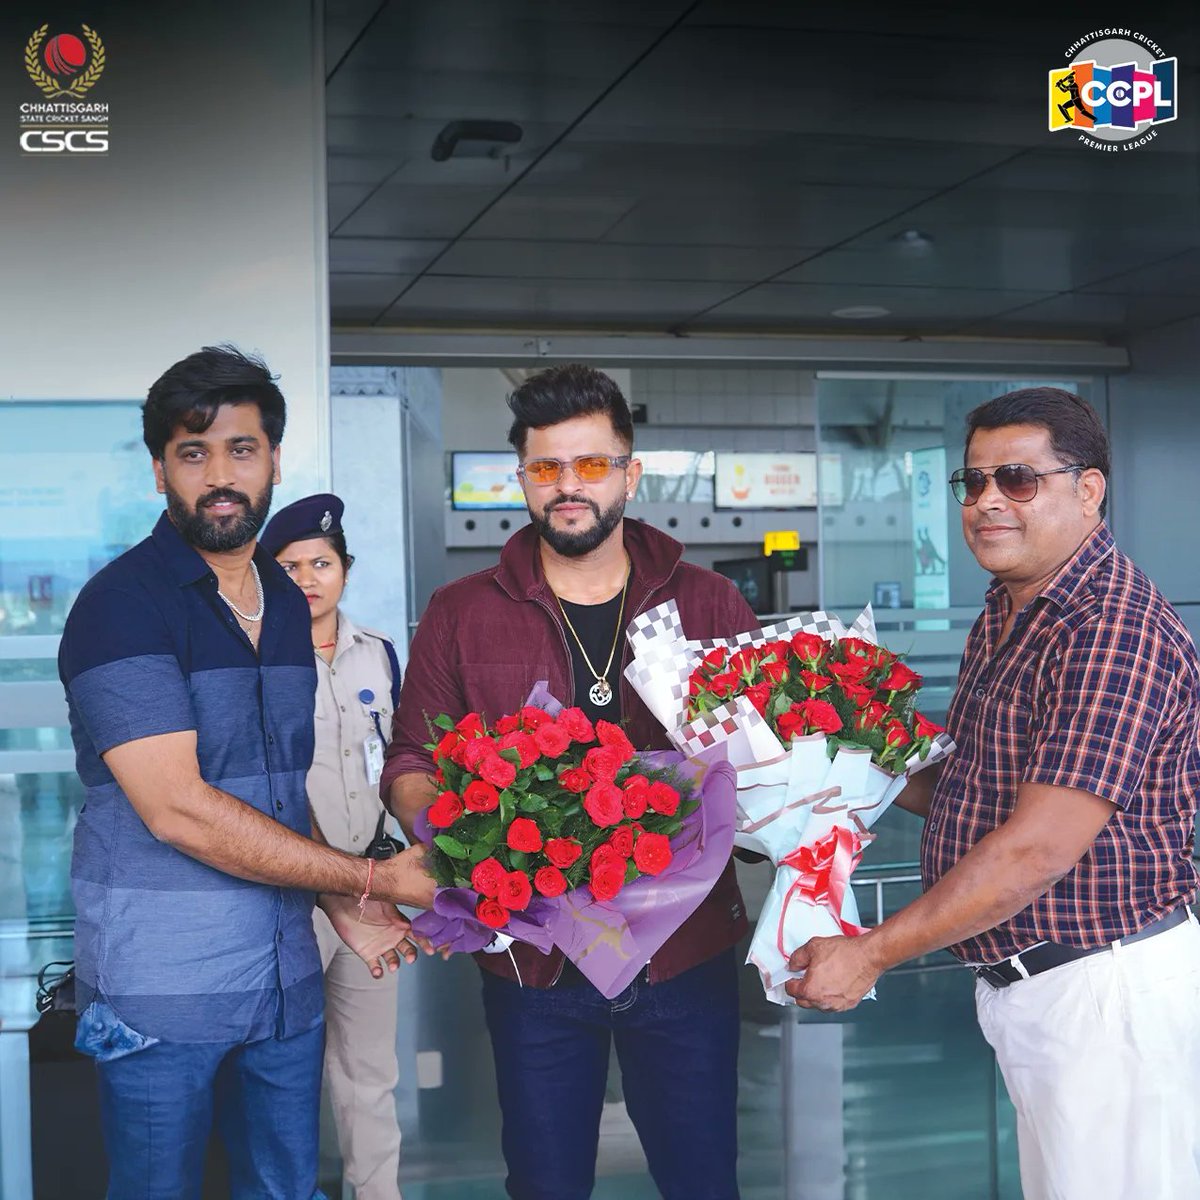 A champion arrives, and the stage is set! The legend @ImRaina, appointed #BrandAmbassador of the league, touched down in Raipur and was warmly welcomed by our CEO. #CCPL2024 #SureshRaina #CCPLAnnouncement #ChhattisgarhCricket #CCPL #CSCS #CricketPremierLeague #TeamCSCS #GoTeamCG